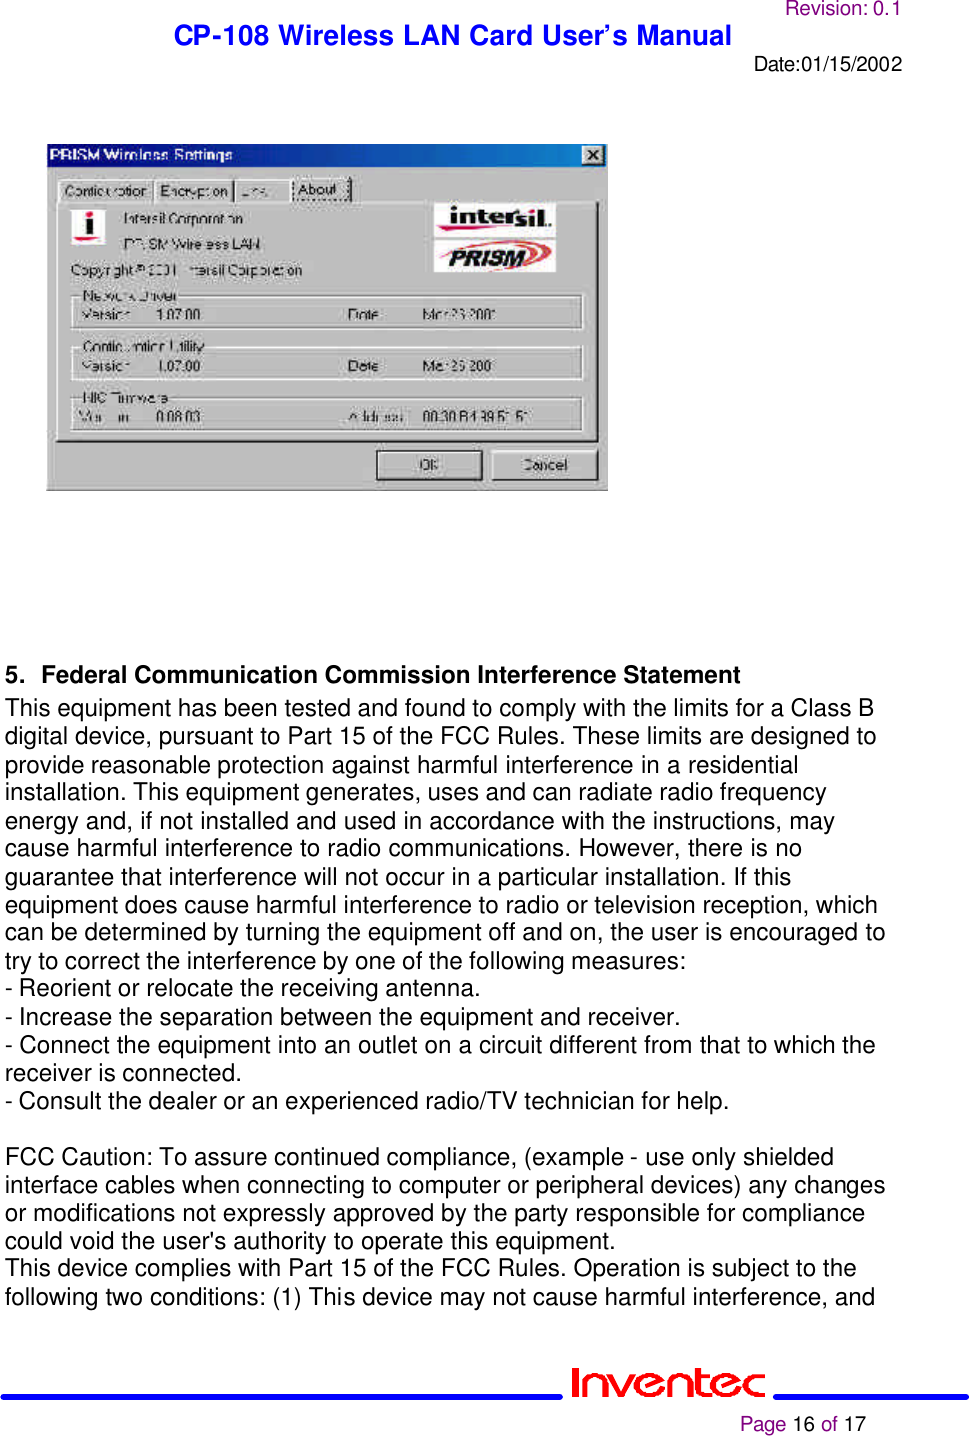 Revision: 0.1 CP-108 Wireless LAN Card User’s Manual Date:01/15/2002                                                                                                                                                             Page 16 of 17                        5. Federal Communication Commission Interference Statement This equipment has been tested and found to comply with the limits for a Class B digital device, pursuant to Part 15 of the FCC Rules. These limits are designed to provide reasonable protection against harmful interference in a residential installation. This equipment generates, uses and can radiate radio frequency energy and, if not installed and used in accordance with the instructions, may cause harmful interference to radio communications. However, there is no guarantee that interference will not occur in a particular installation. If this equipment does cause harmful interference to radio or television reception, which can be determined by turning the equipment off and on, the user is encouraged to try to correct the interference by one of the following measures: - Reorient or relocate the receiving antenna. - Increase the separation between the equipment and receiver. - Connect the equipment into an outlet on a circuit different from that to which the receiver is connected. - Consult the dealer or an experienced radio/TV technician for help.  FCC Caution: To assure continued compliance, (example - use only shielded interface cables when connecting to computer or peripheral devices) any changes or modifications not expressly approved by the party responsible for compliance could void the user&apos;s authority to operate this equipment. This device complies with Part 15 of the FCC Rules. Operation is subject to the following two conditions: (1) This device may not cause harmful interference, and 